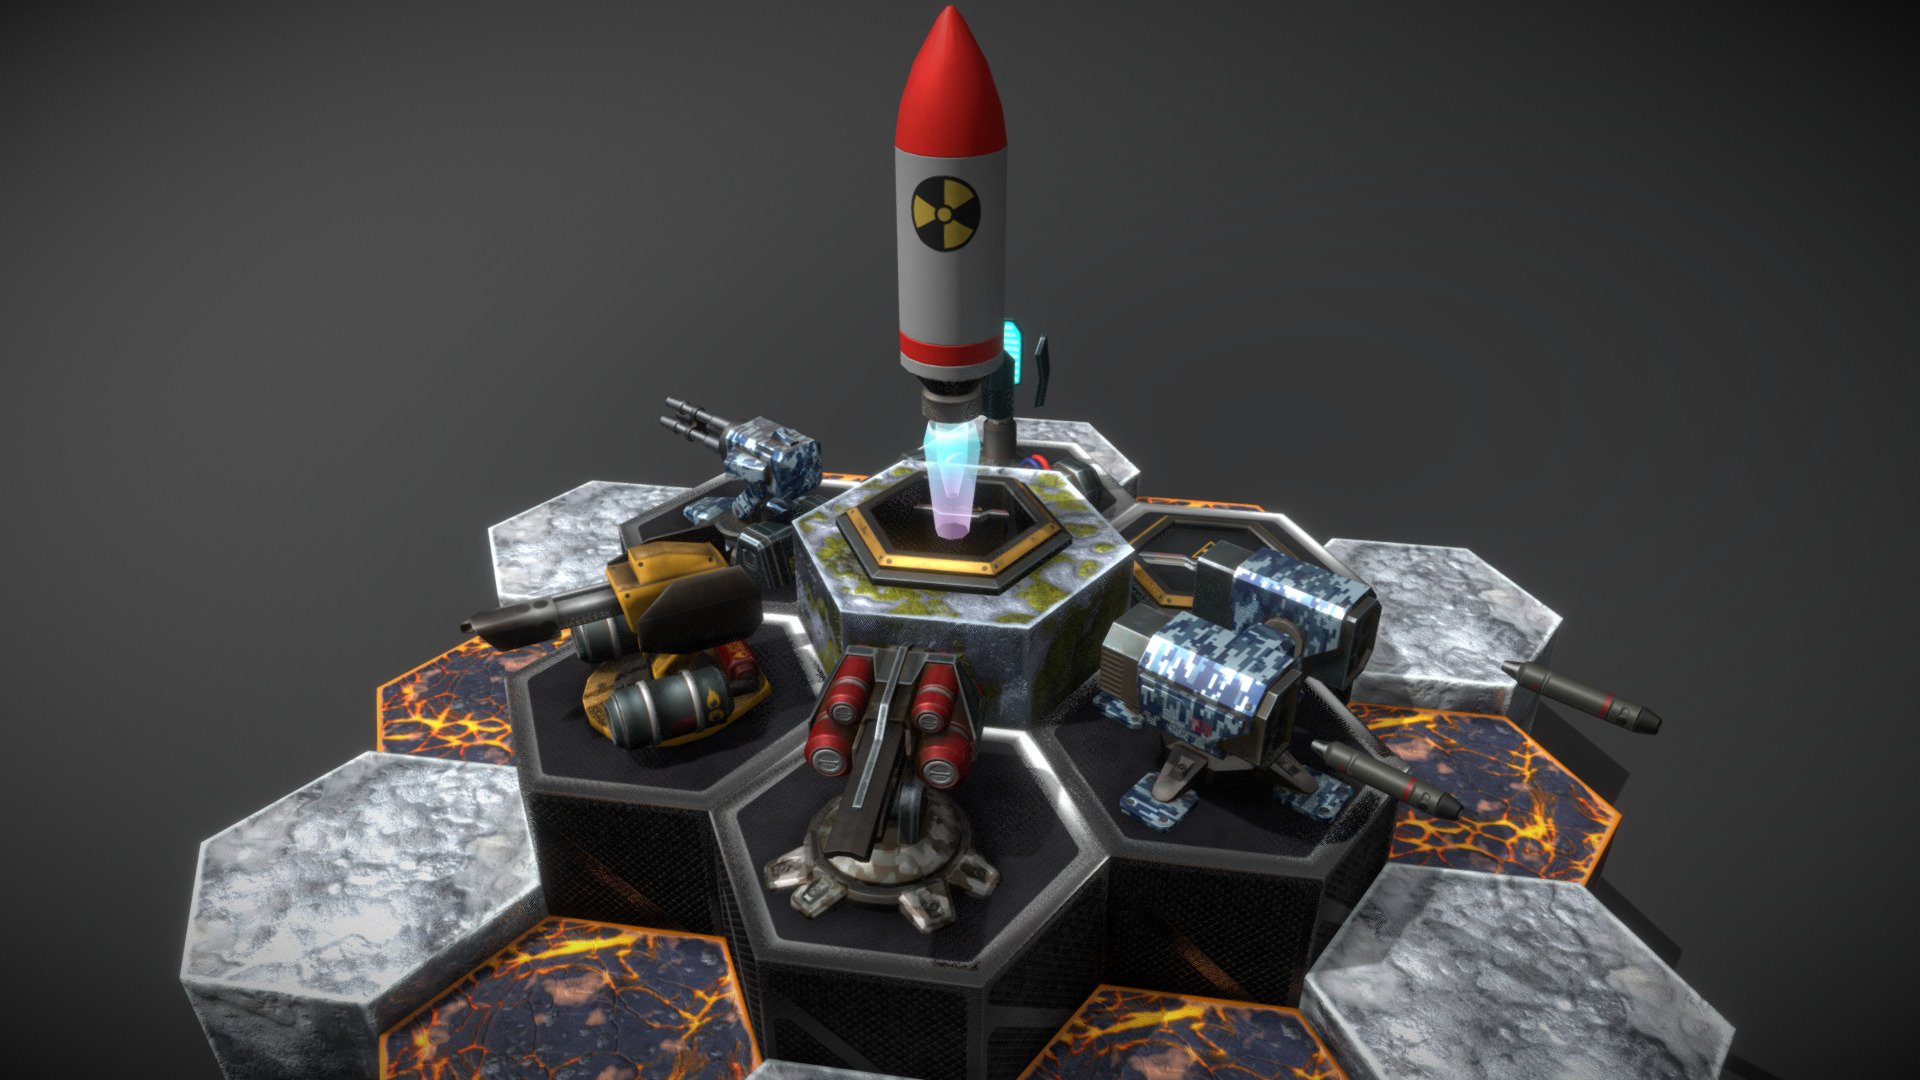 Tower Defence Sci-Fi Turrets Pack